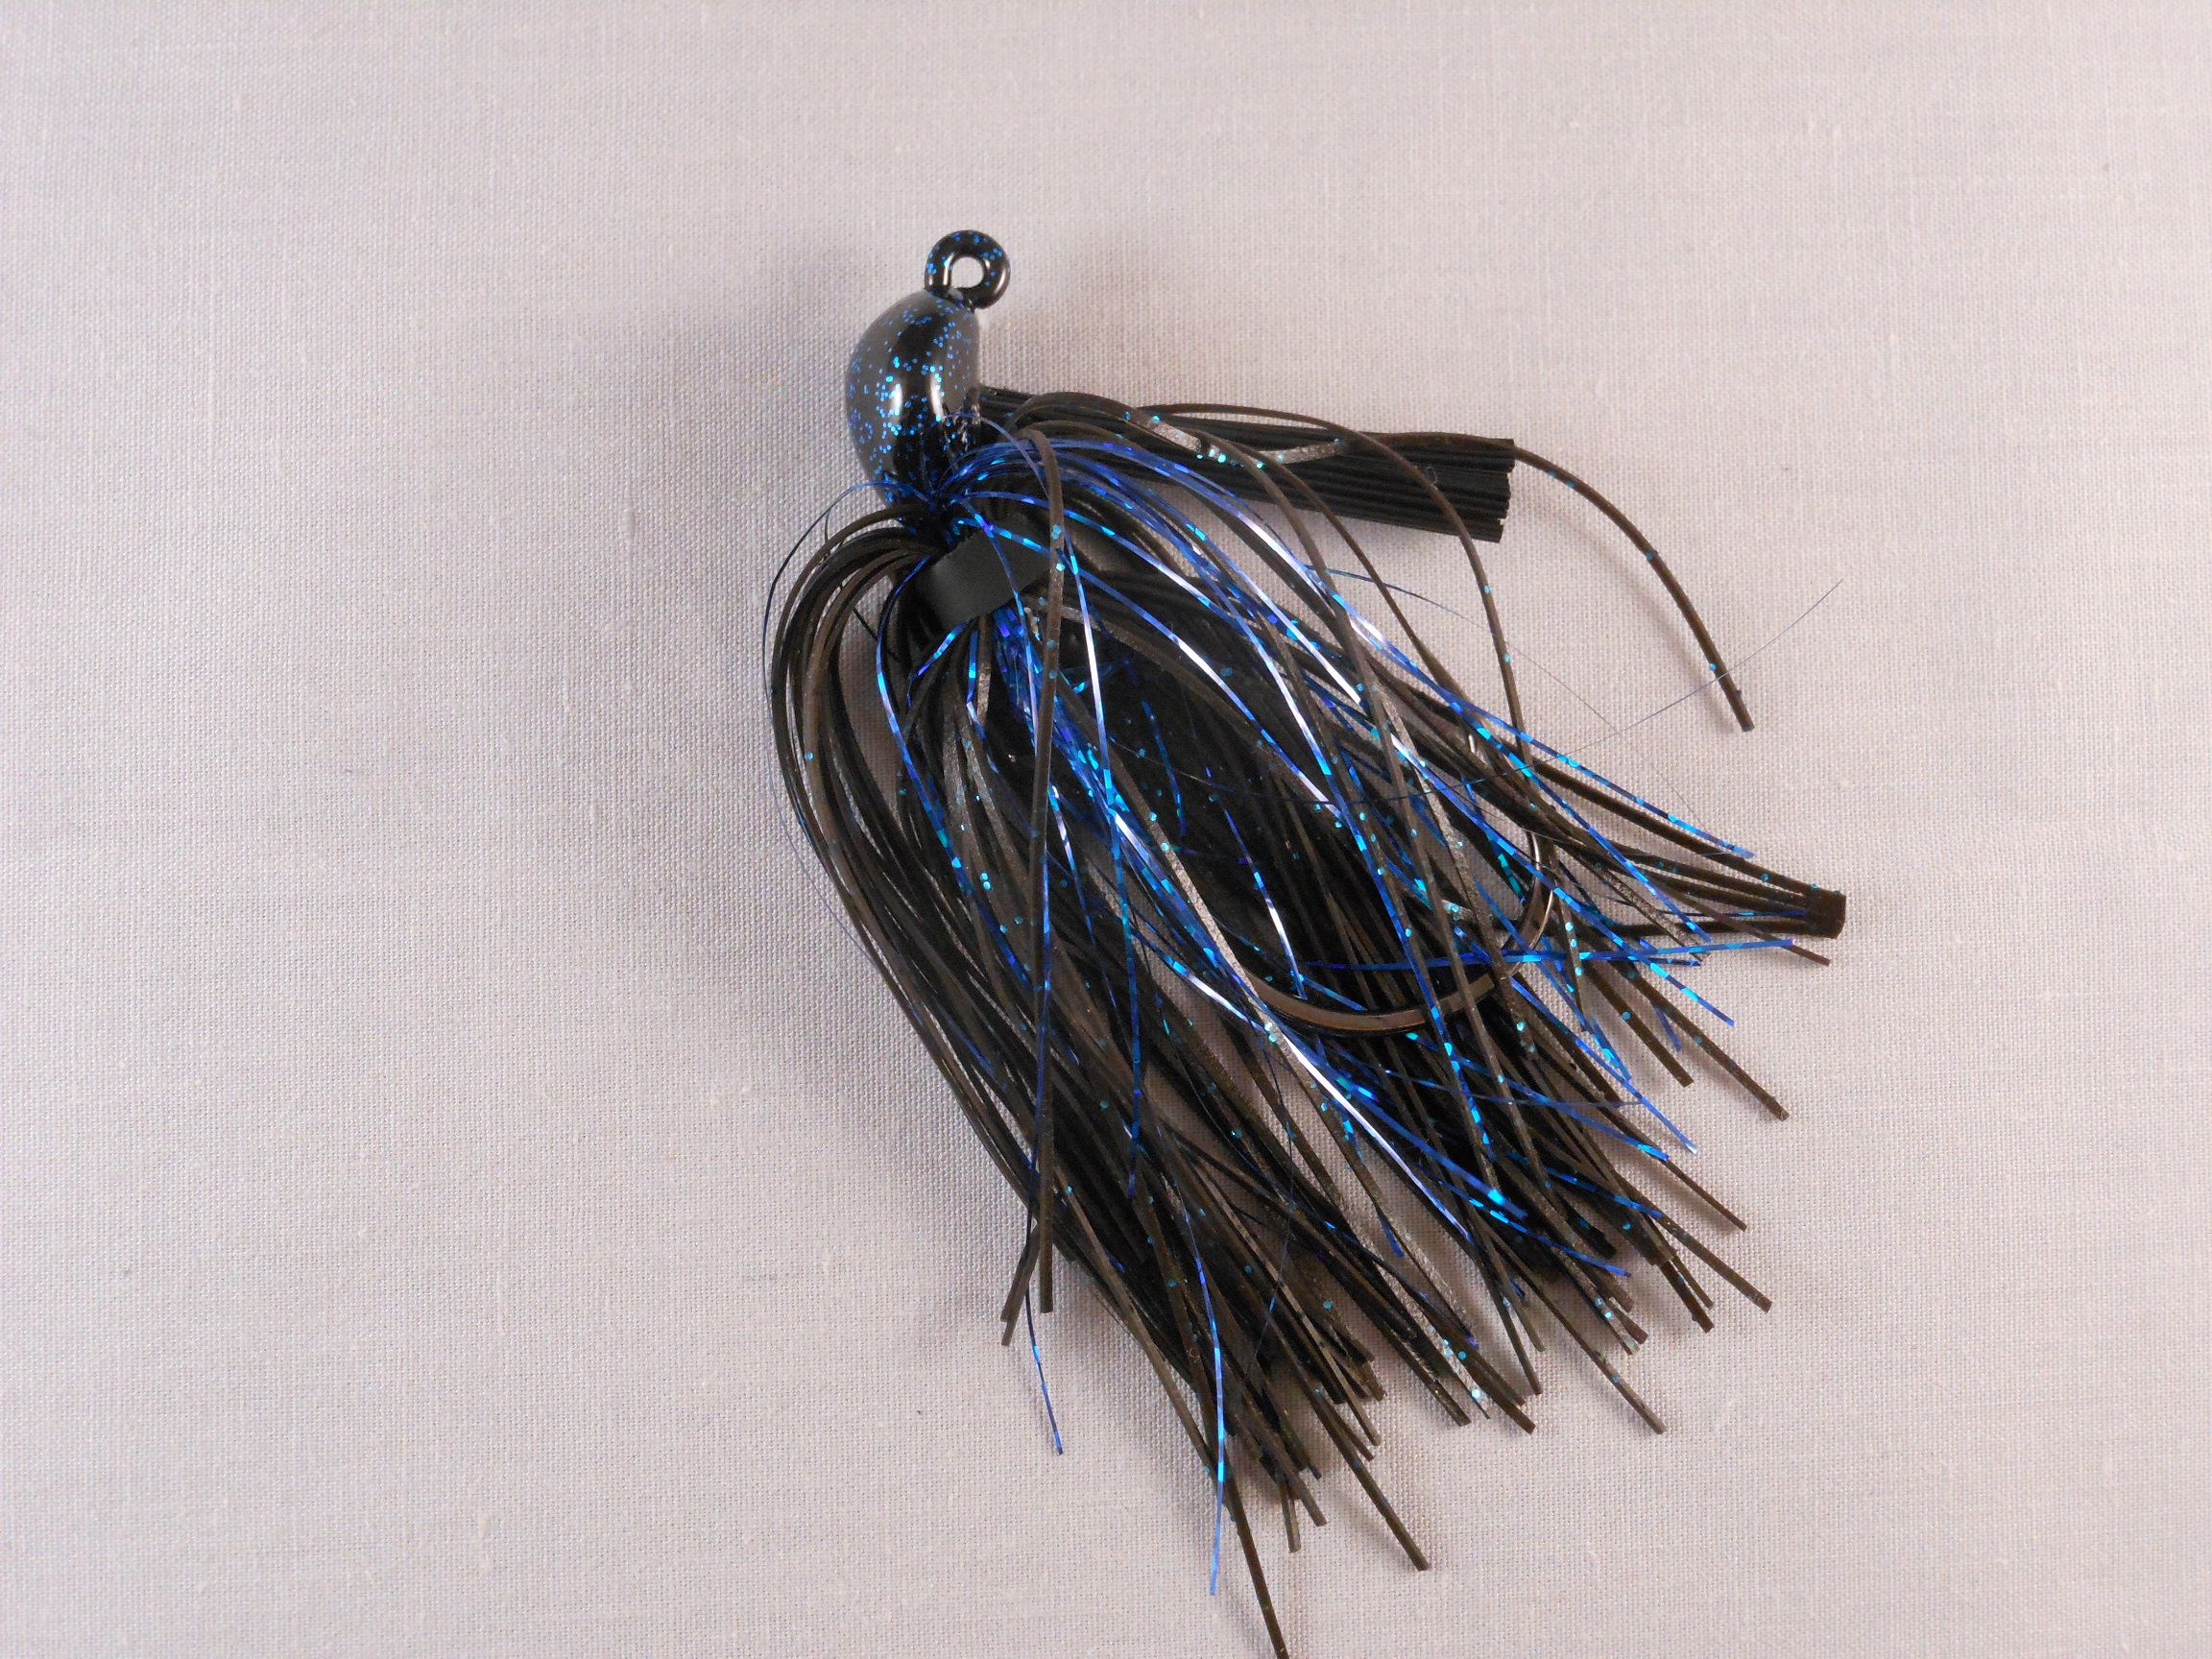 Big Mouth Lures: Jigs